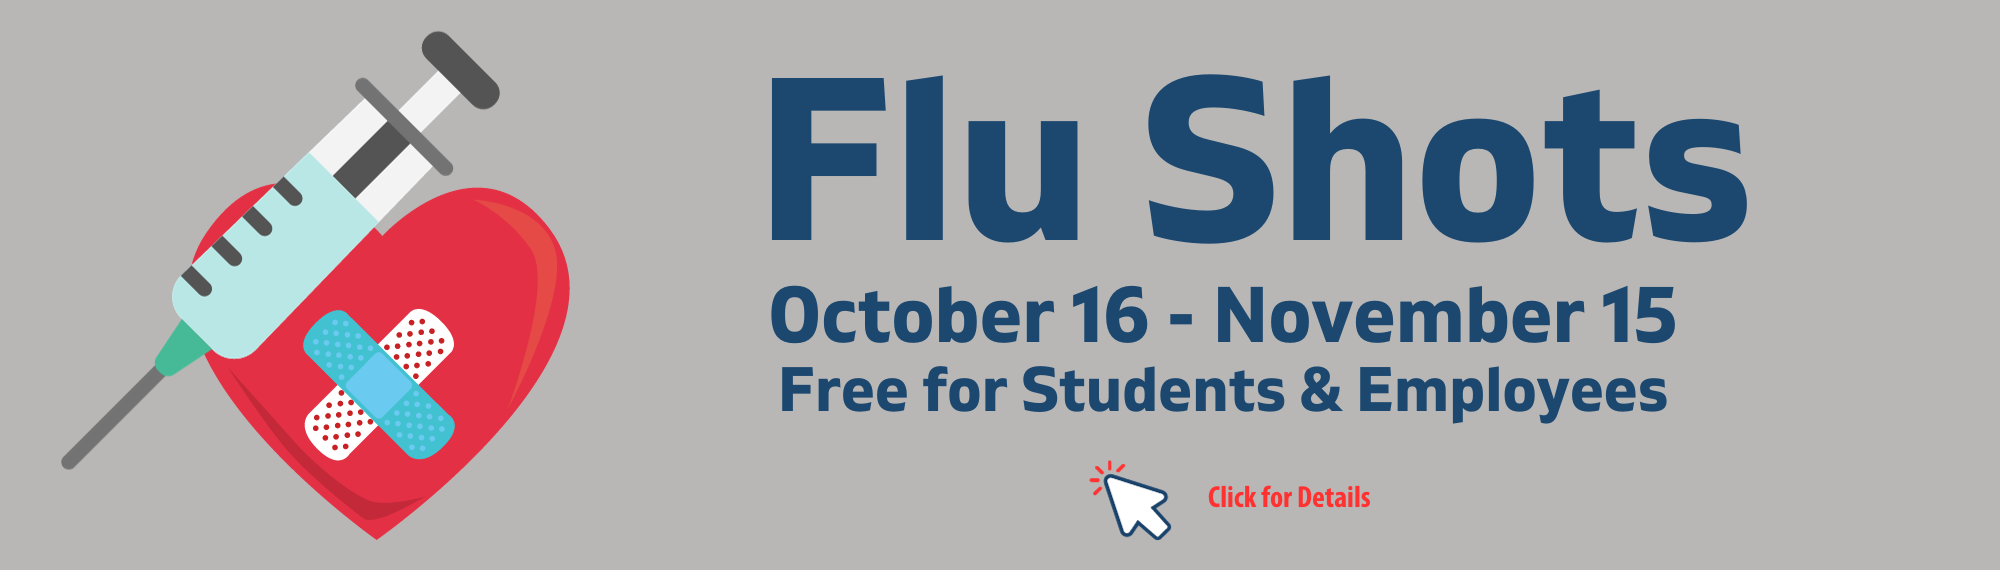 Flu Shots October 16-November 15 Free for Students and Employees. Click for Details